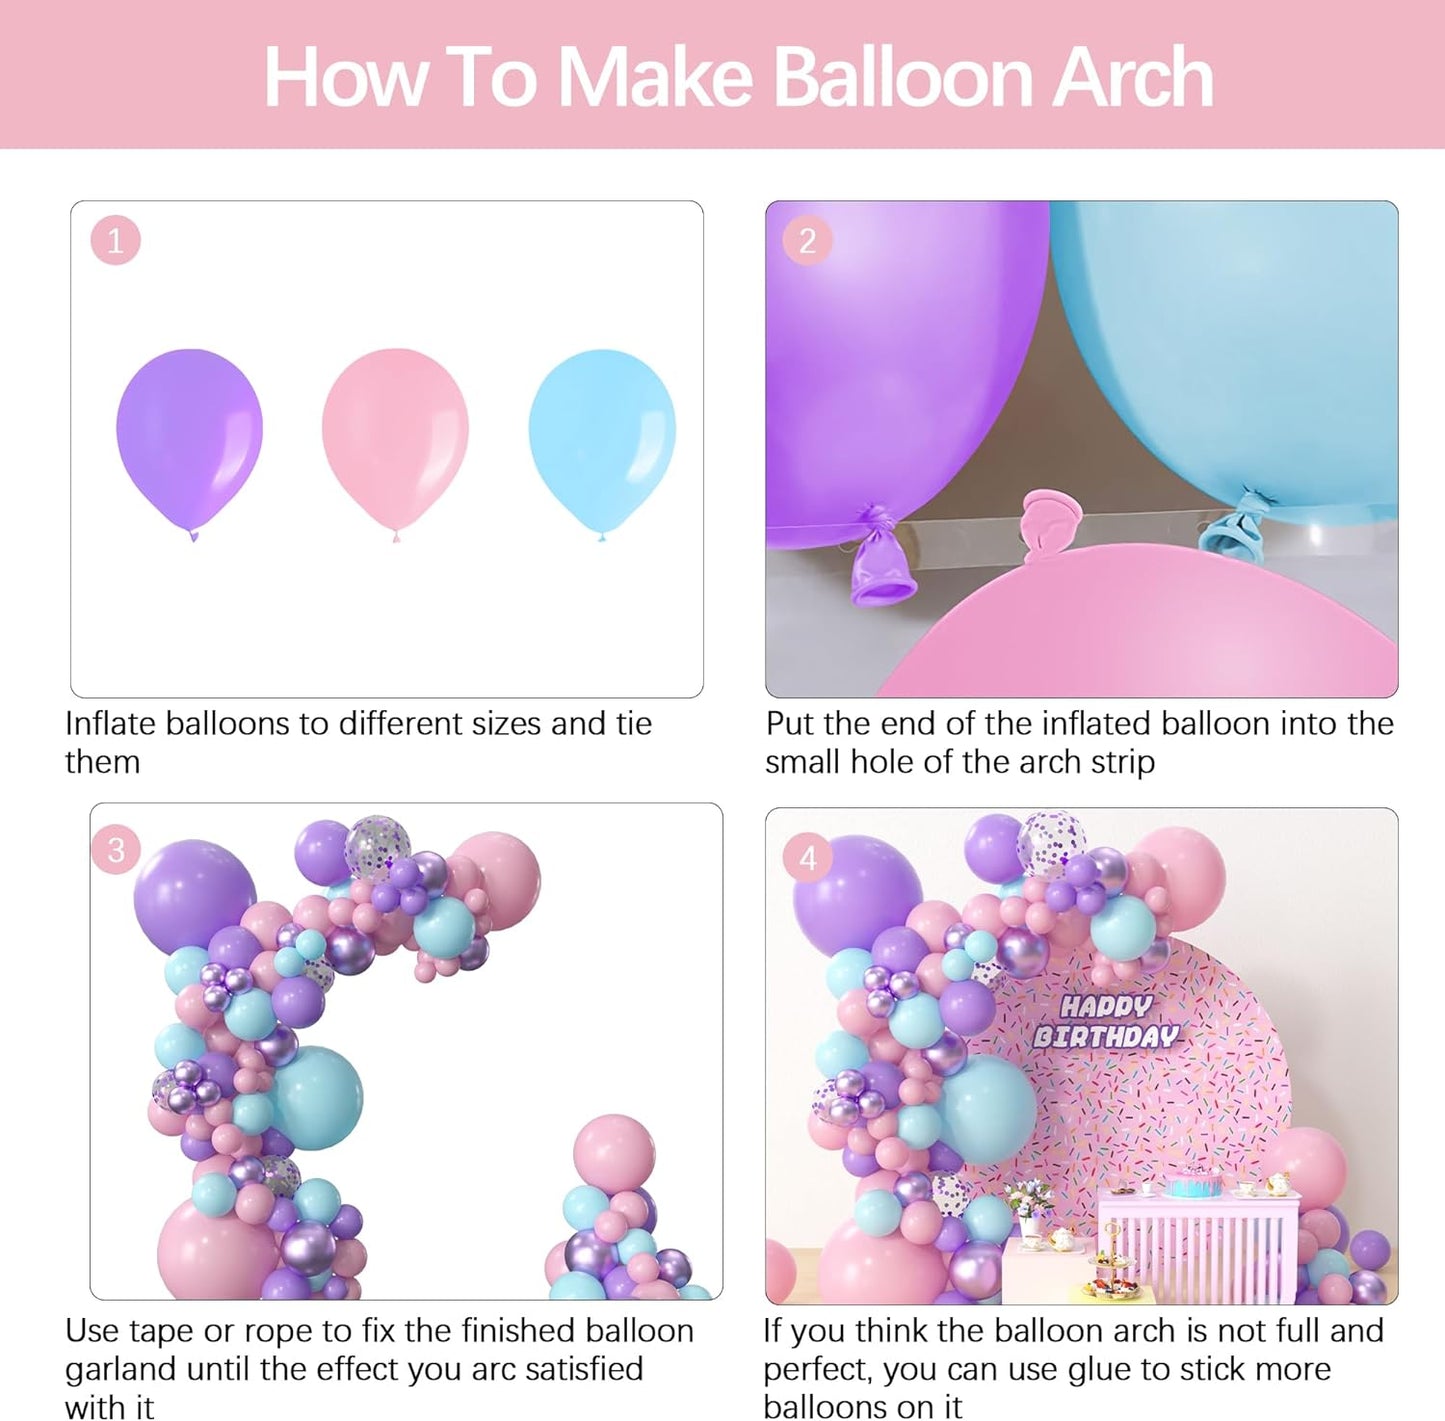 Pink Purple Pastel Blue Confetti Balloon Garland Arch Kit | Suitable for Gabby's Dollhouse Theme Party Decorations